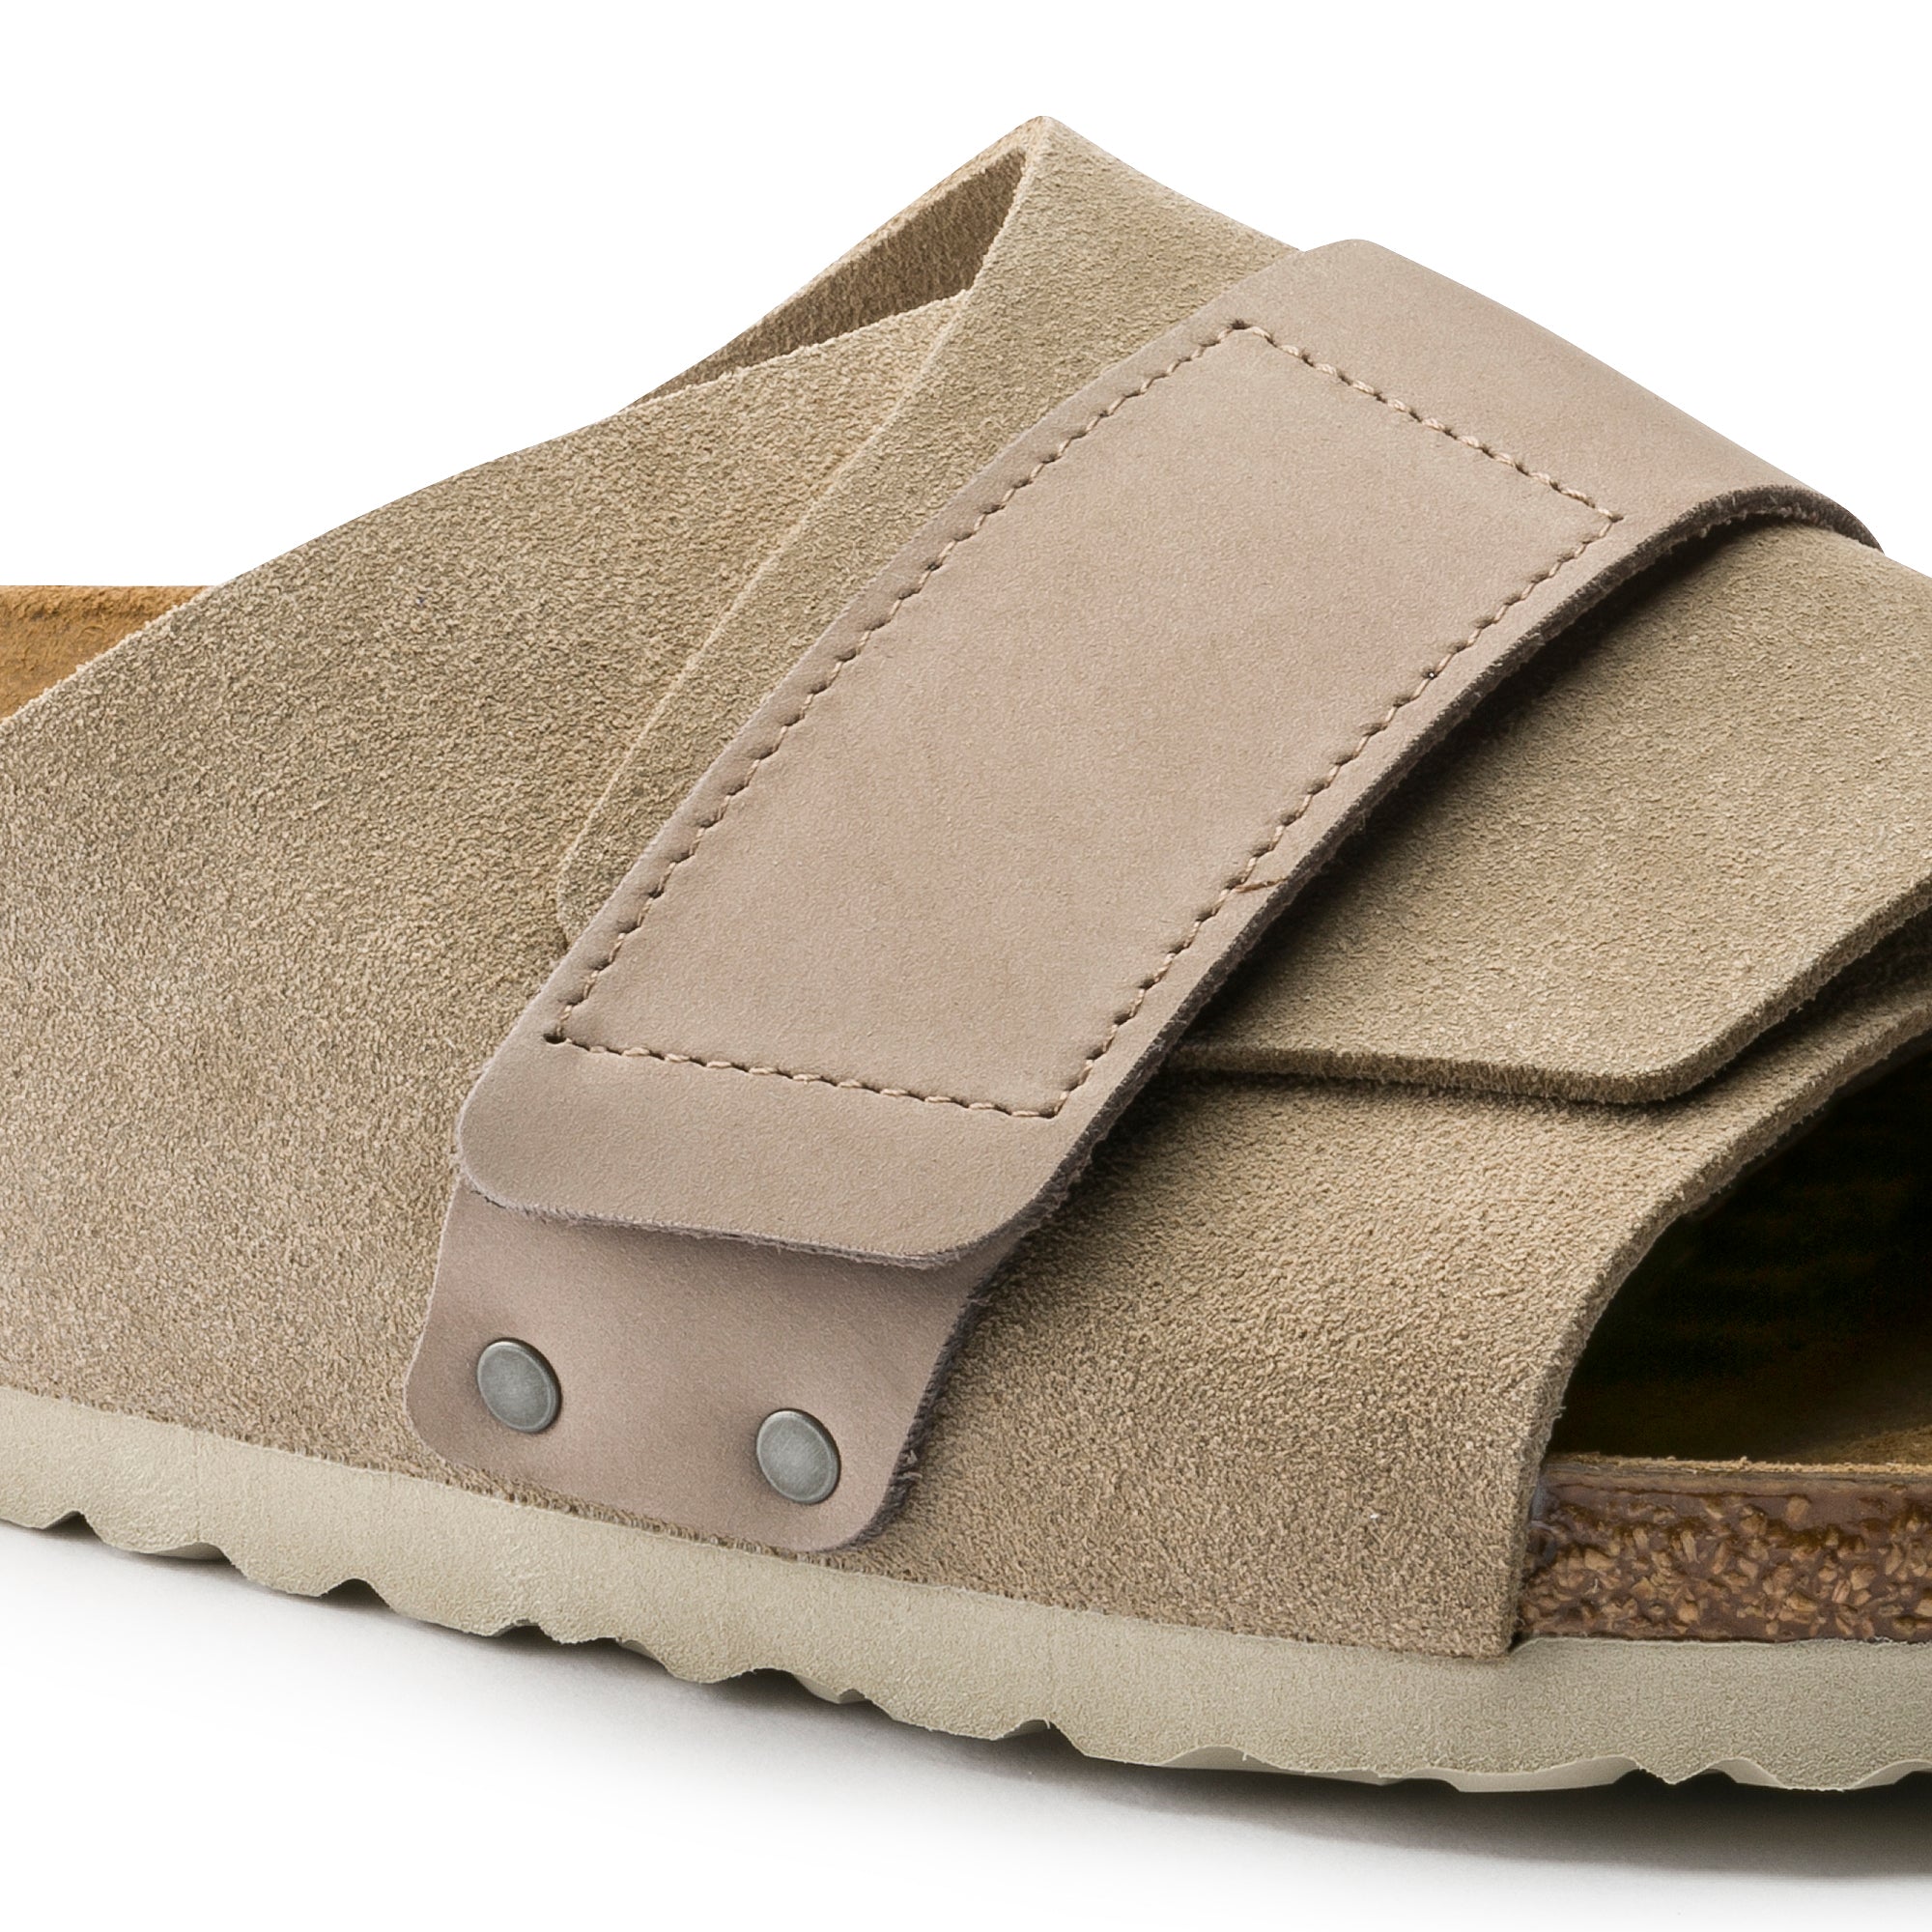 Kyoto Nubuck/Suede Leather in Taupe - Milu James St